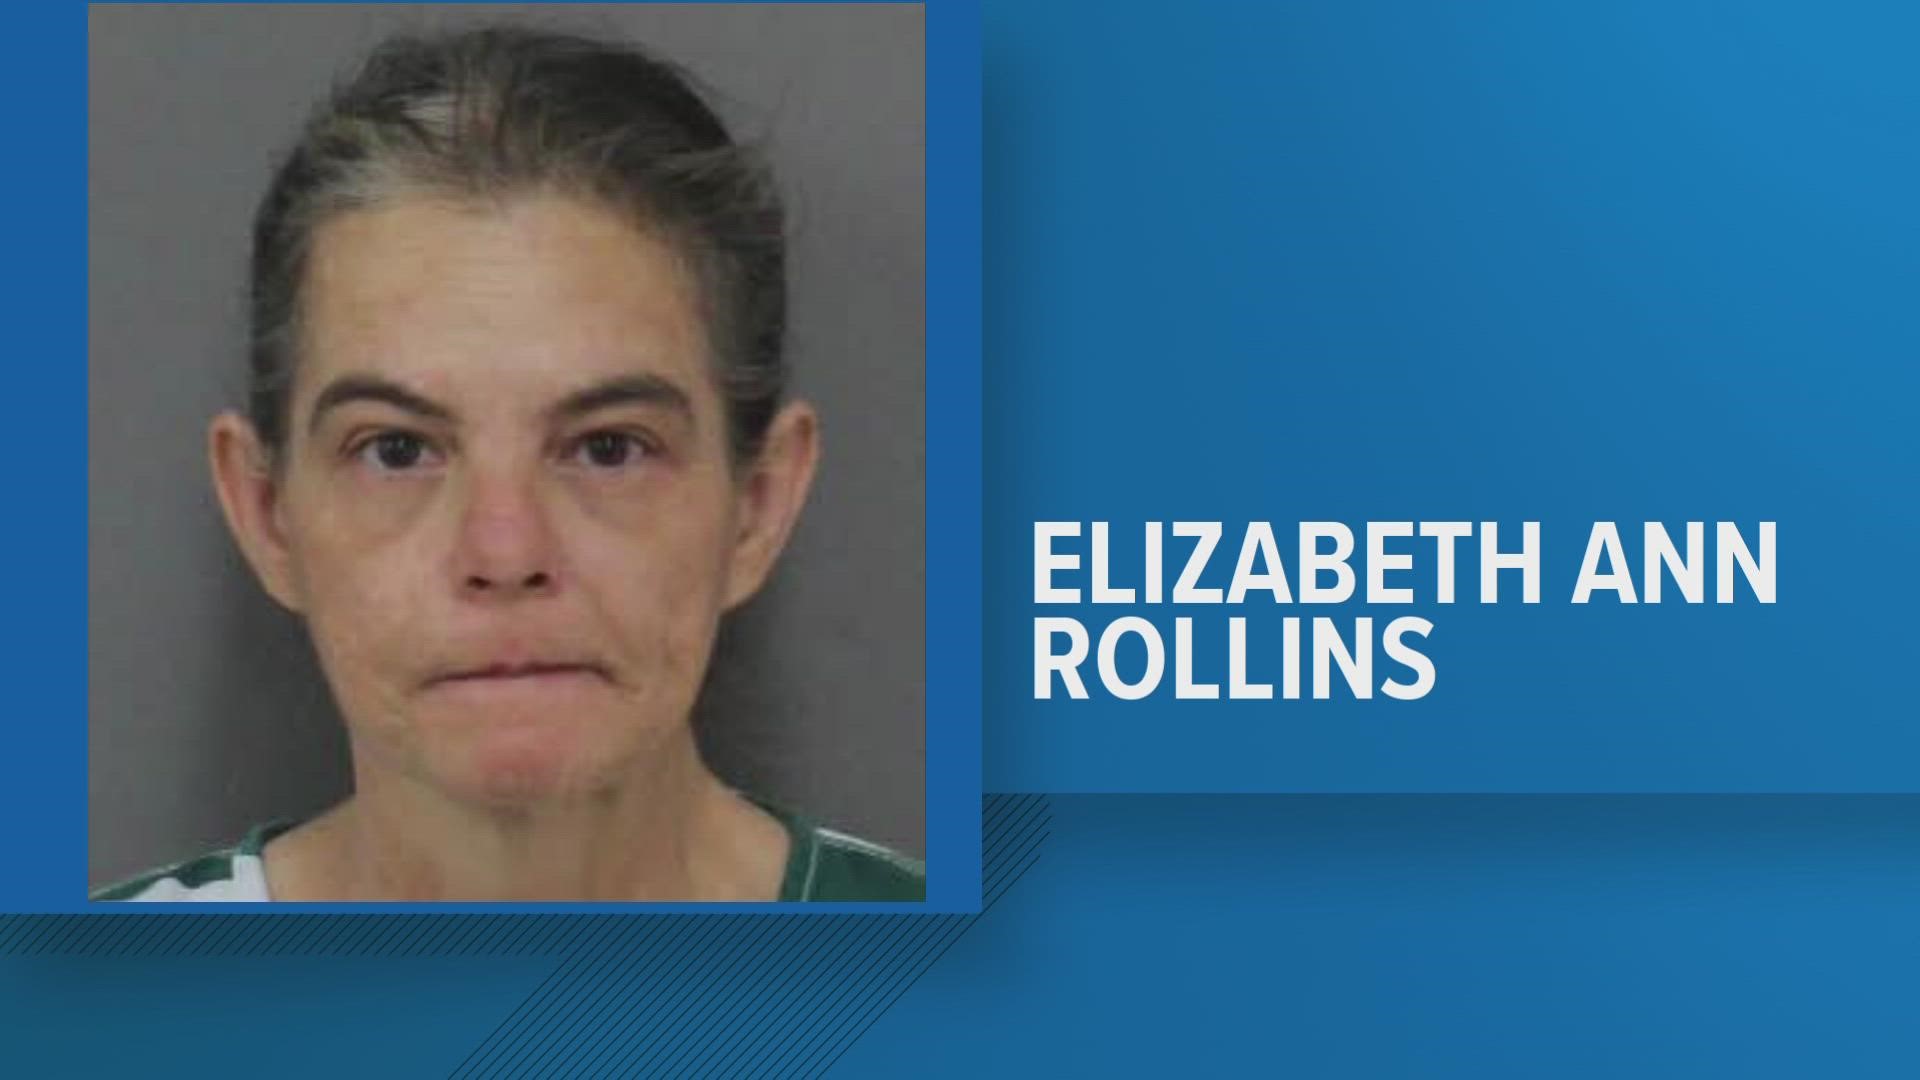 Elizabeth Ann Rollins was arrested after deputies were called to Jefferson Memorial Hospital for a report of possible elder abuse.